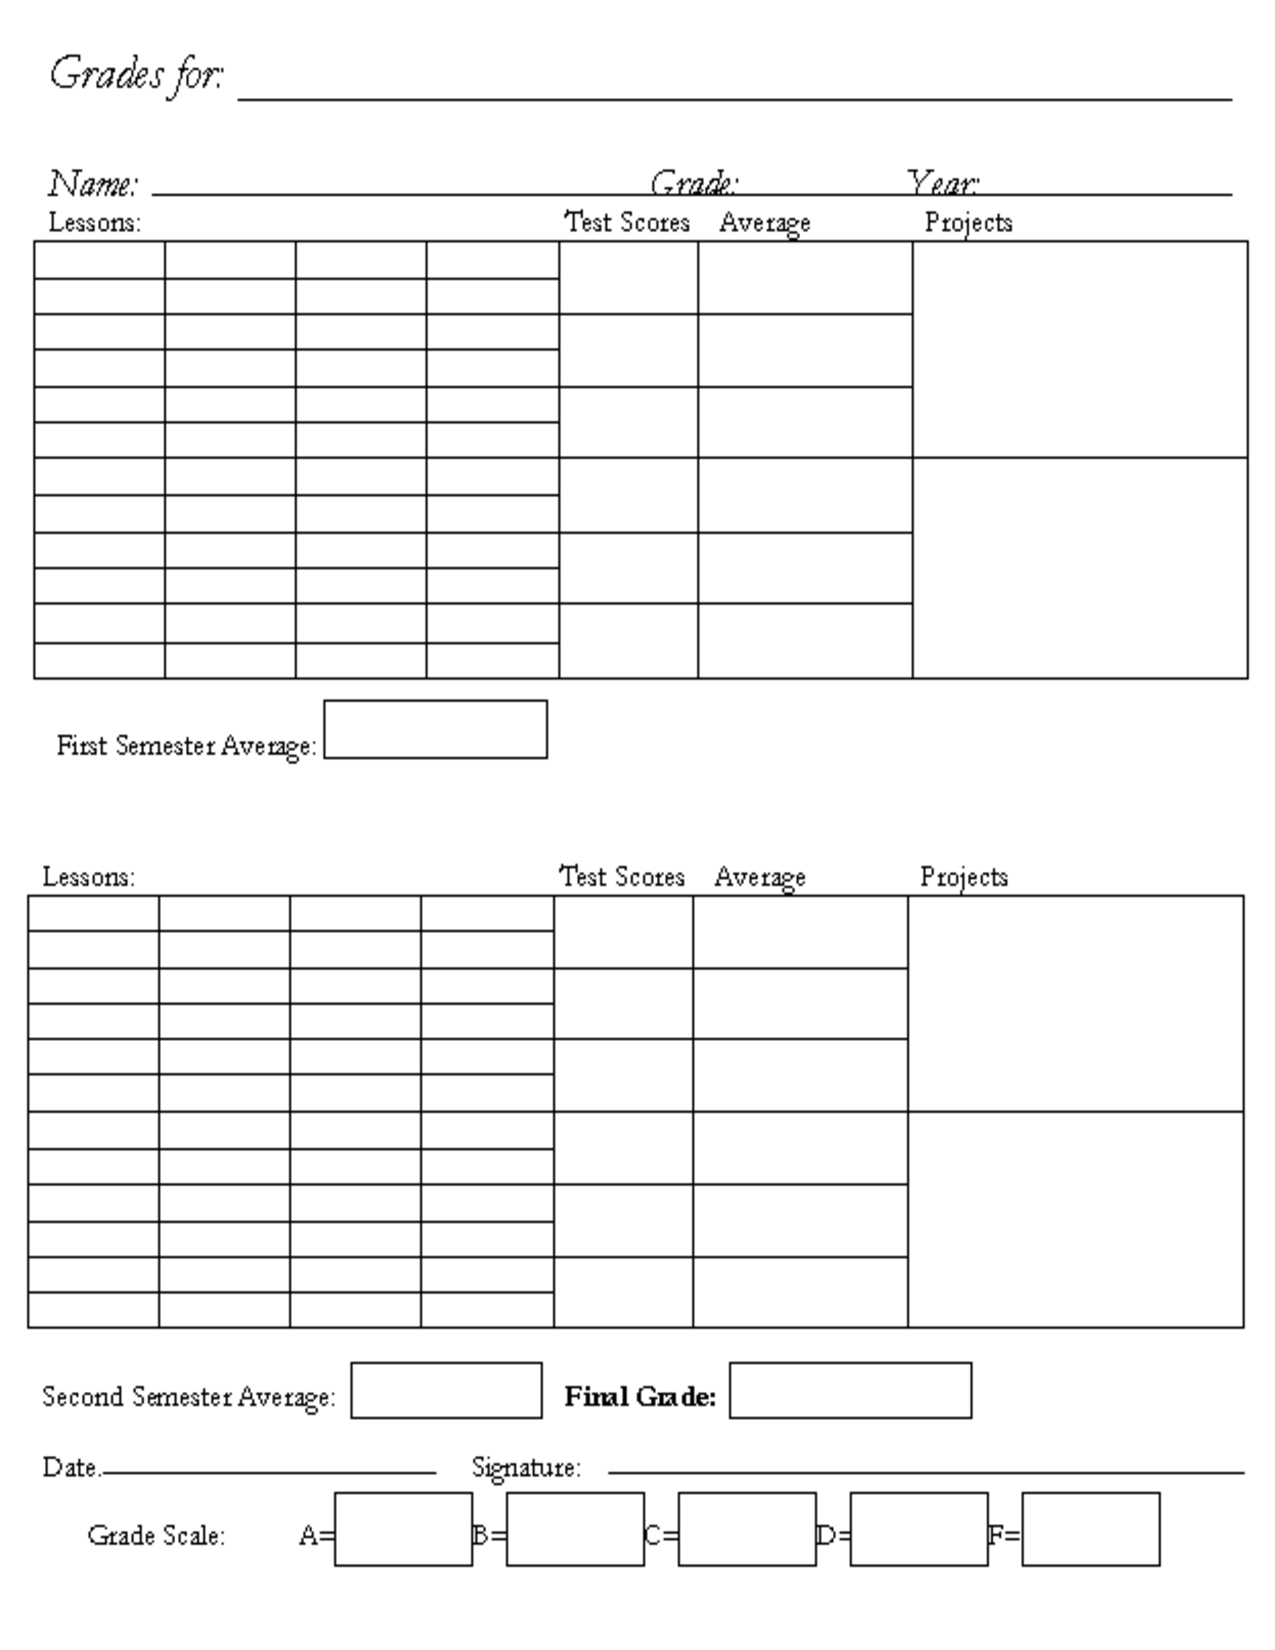 Pinbecky Crossett On Children #10 | Report Card Template Intended For Result Card Template